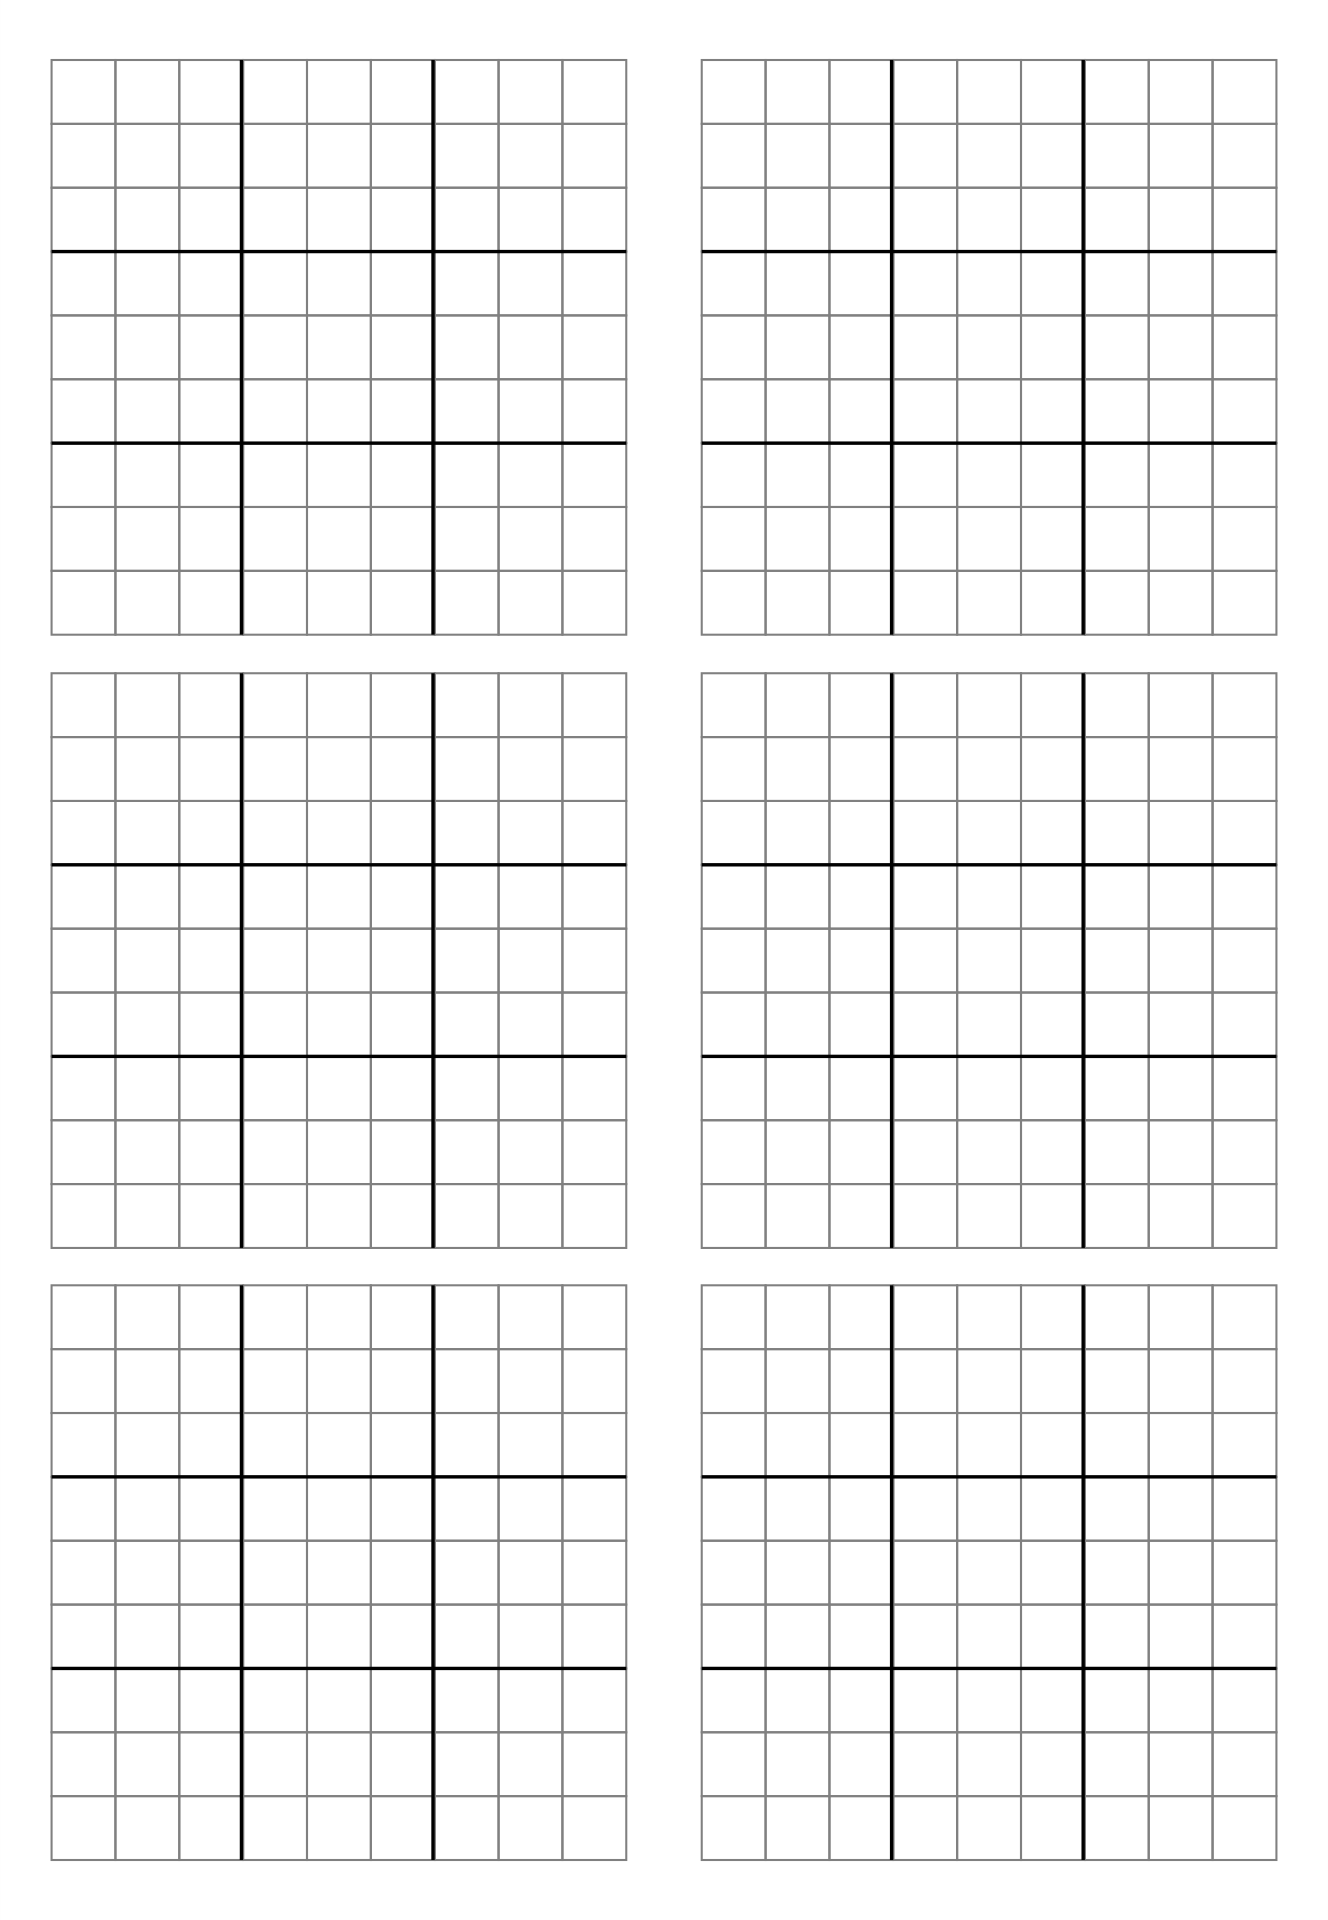 sudoku blank grid for printing out blank sudoku grid for download and